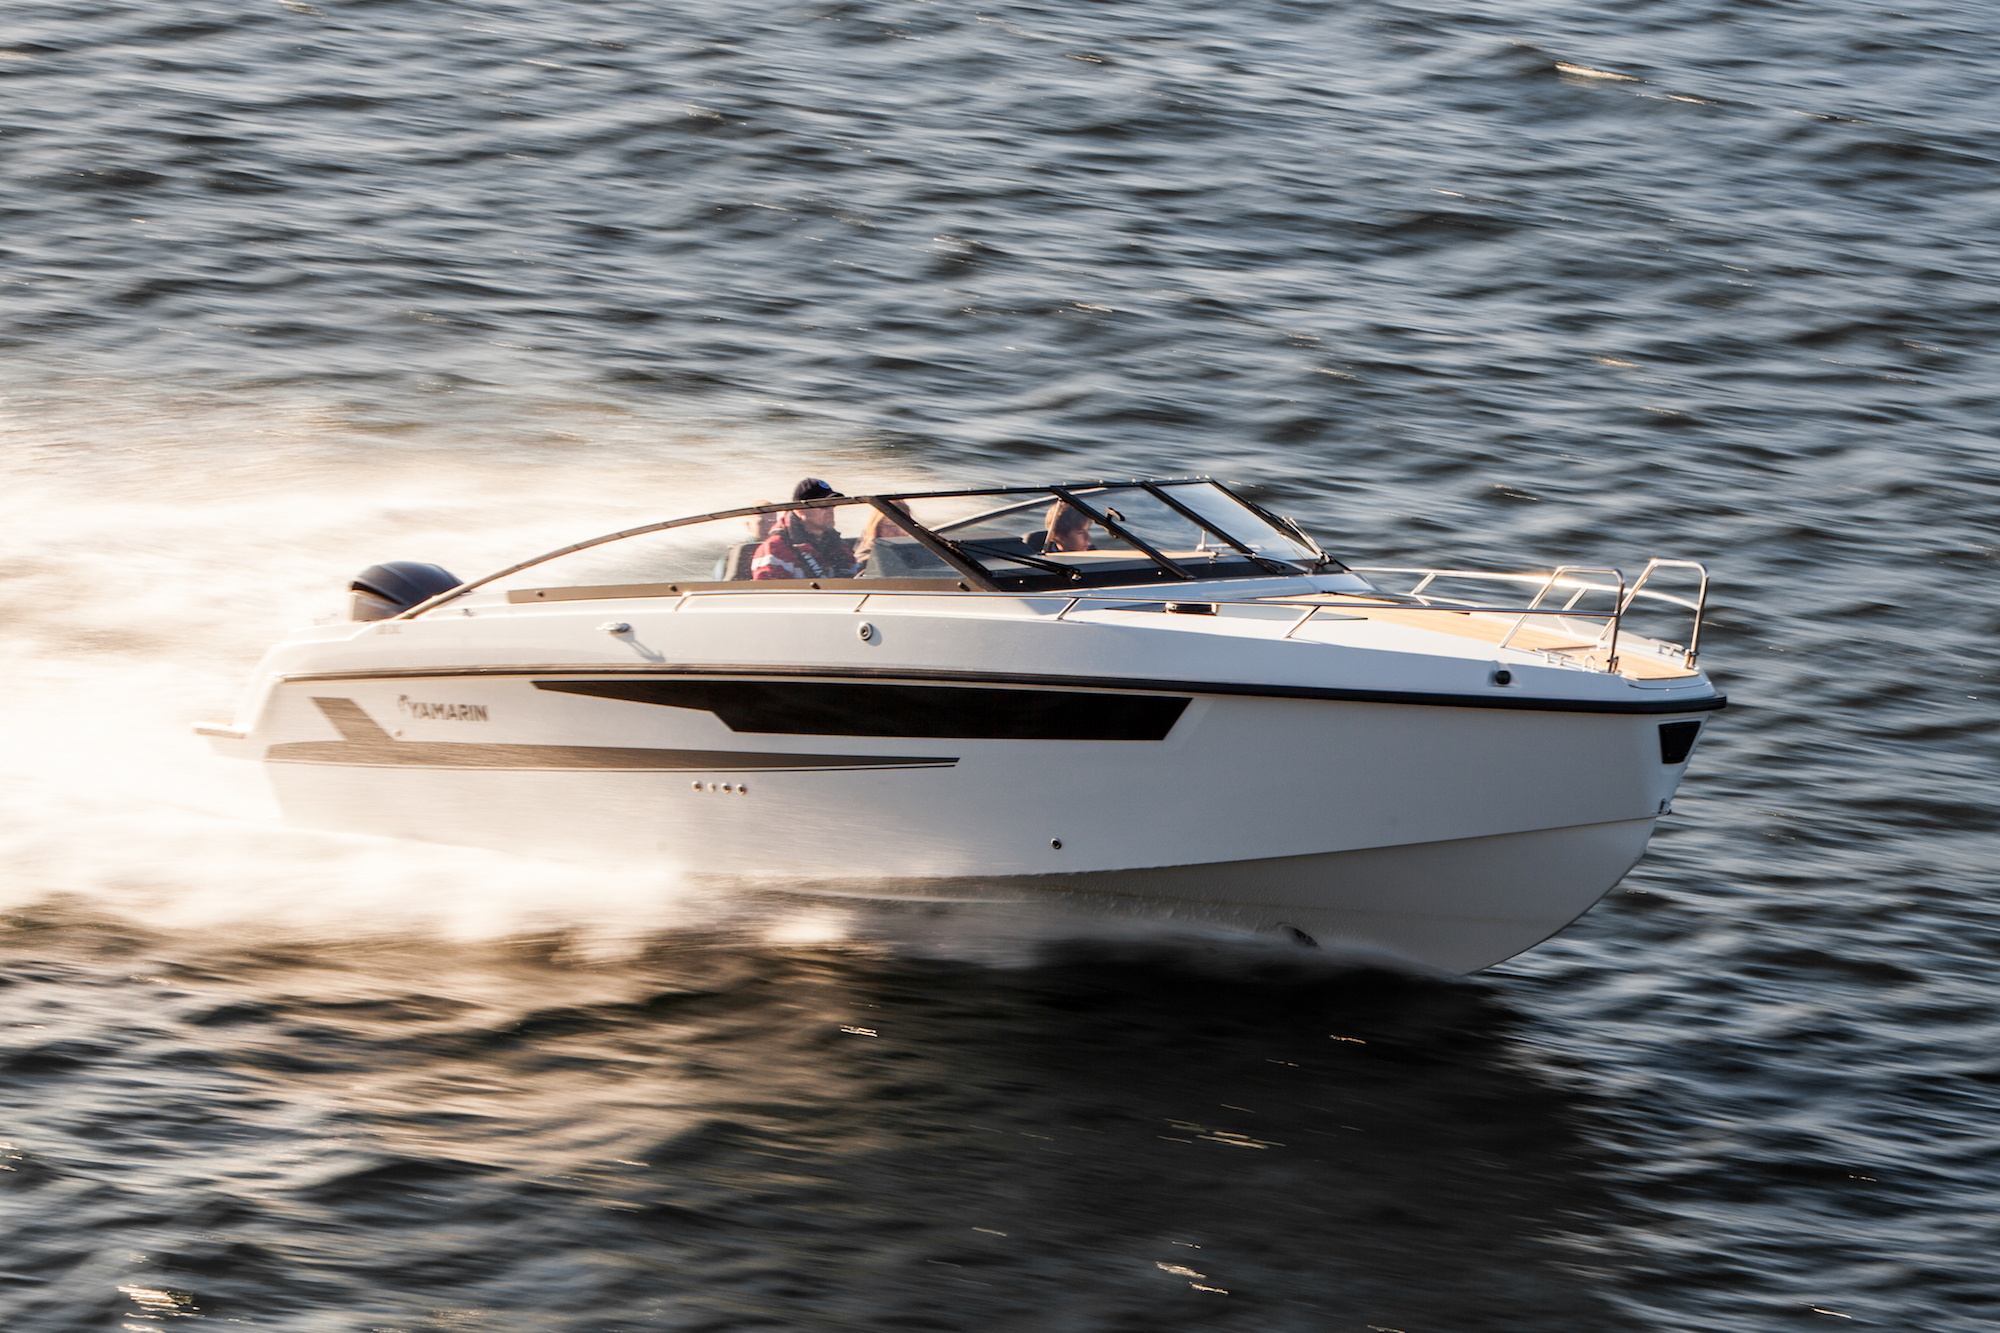 Yamarin 88 DC will be presented at the Düsseldorf boat show